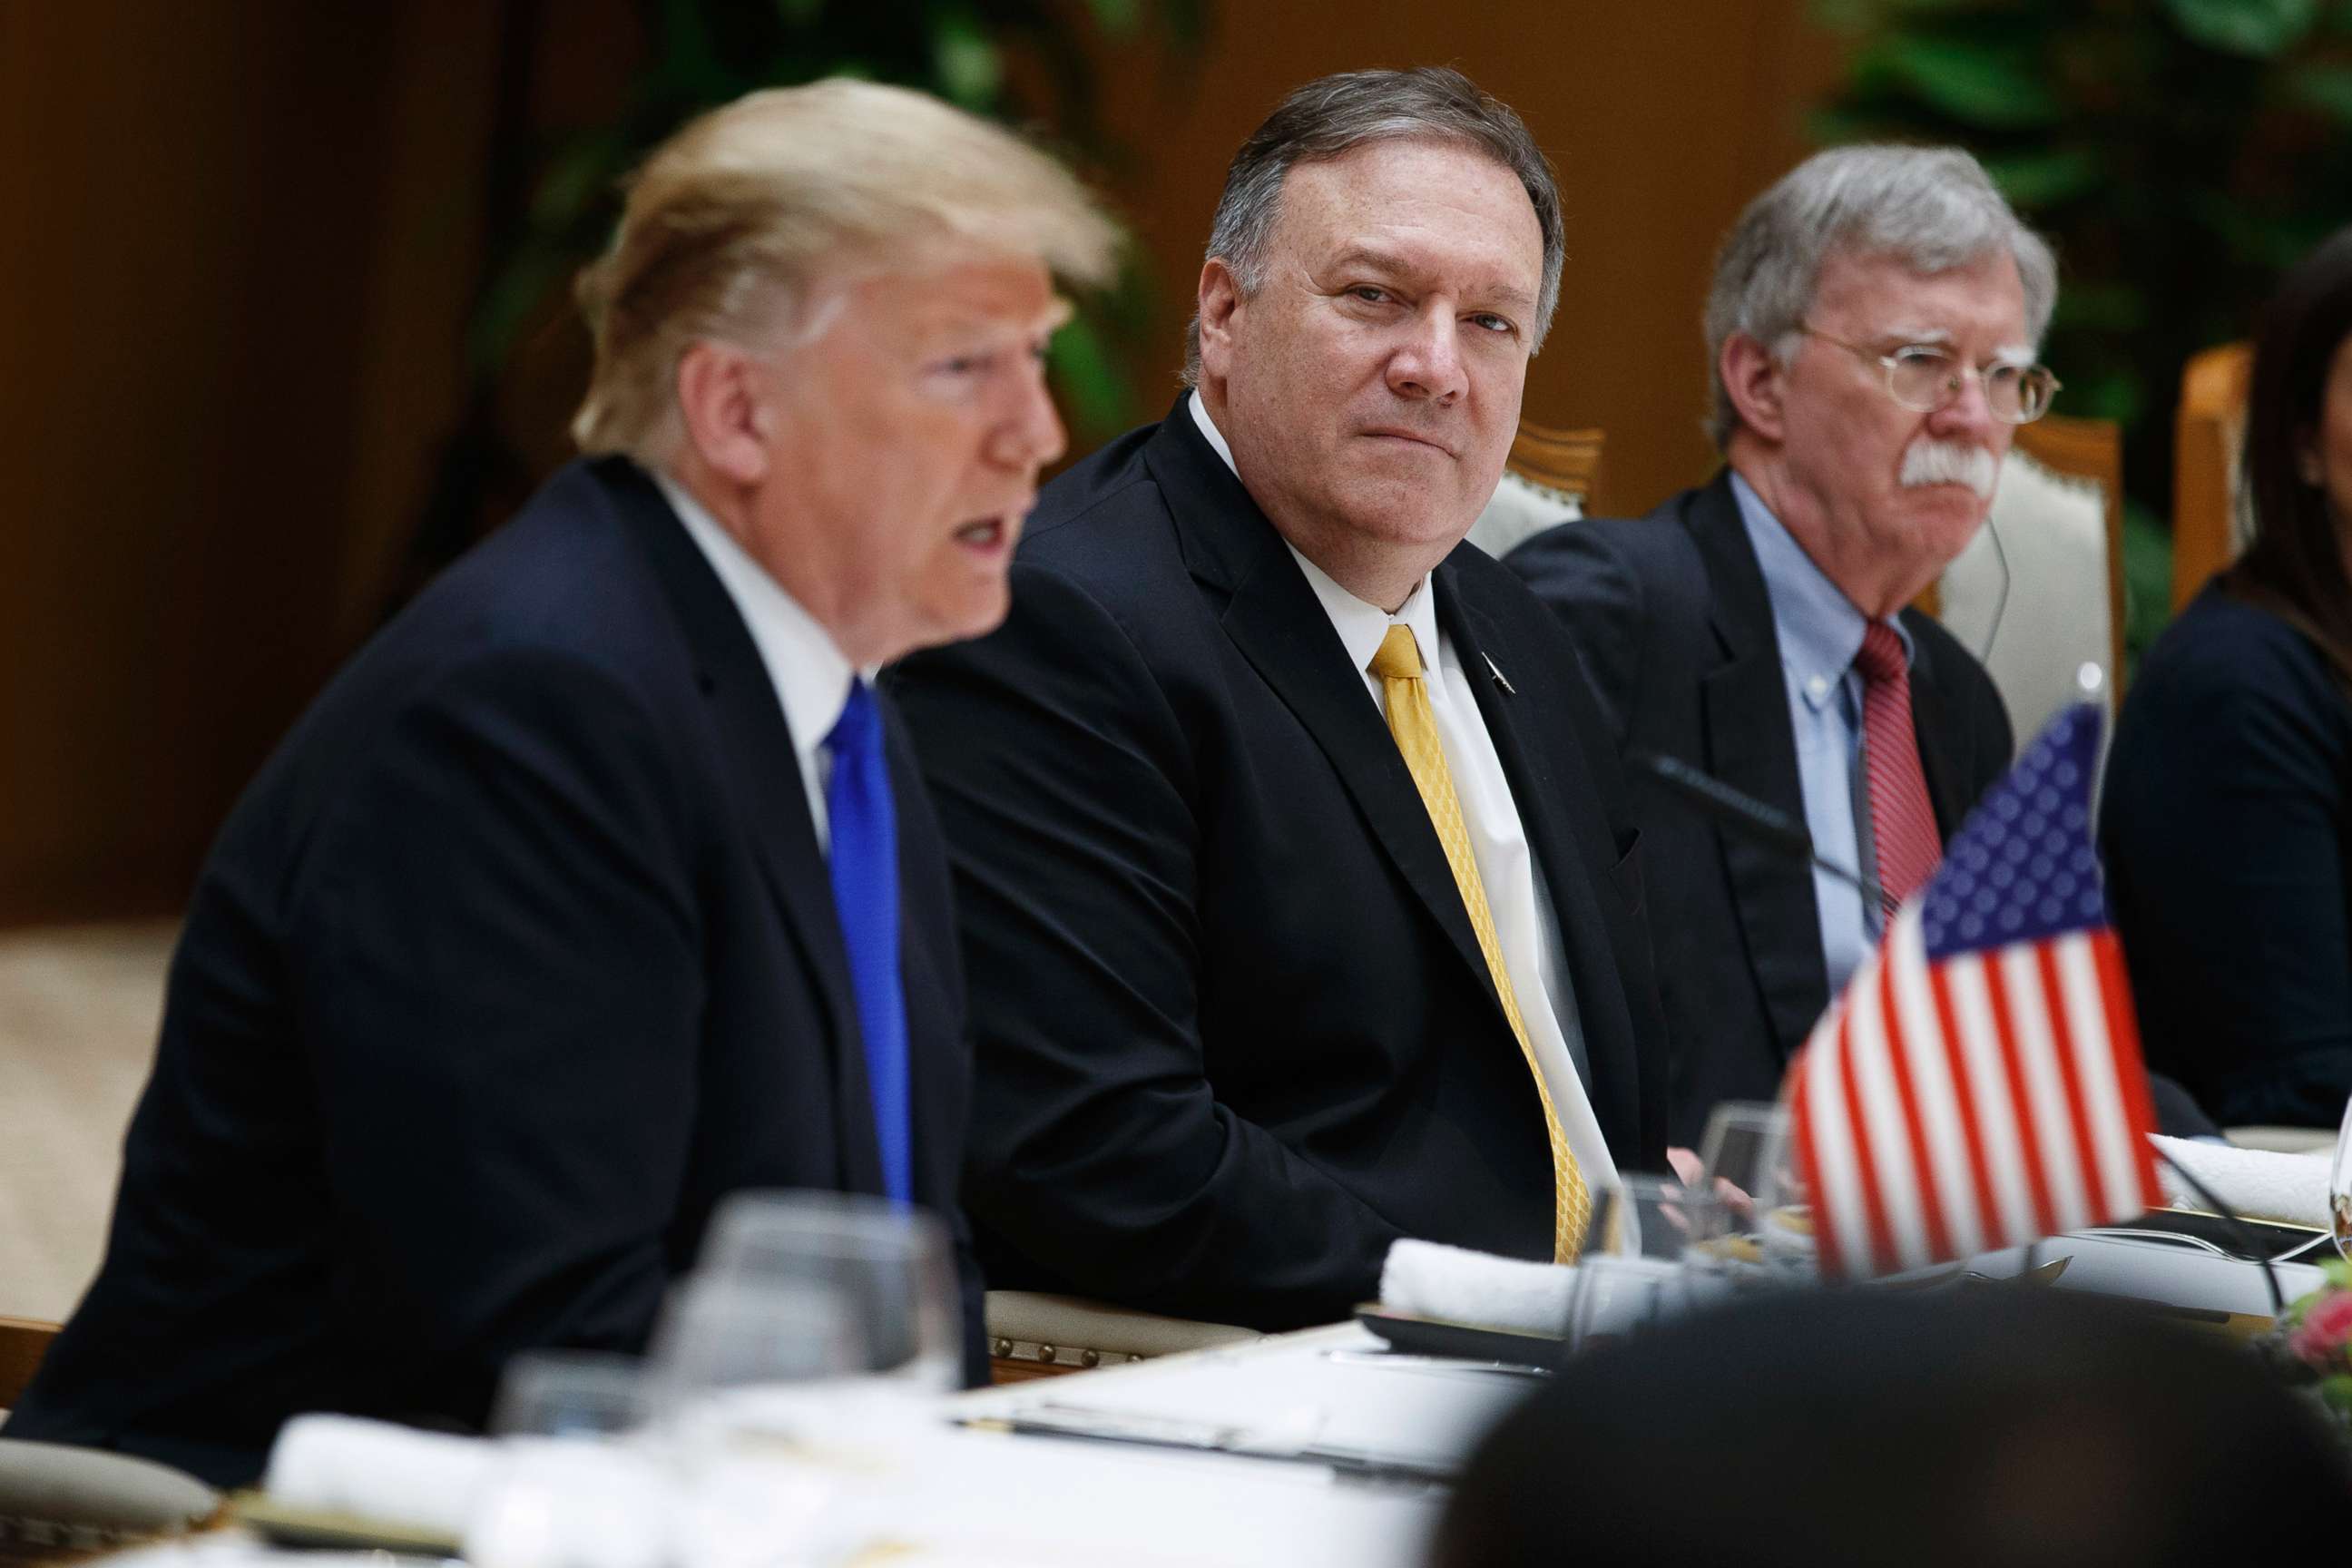 PHOTO: Secretary of State Mike Pompeo, center, and national security adviser John Bolton, right, listen as President Donald Trump speaks during a meeting with Vietnamese Prime Minister Nguyen Xuan Phuc, Feb. 27, 2019, in Hanoi, Vietnam.